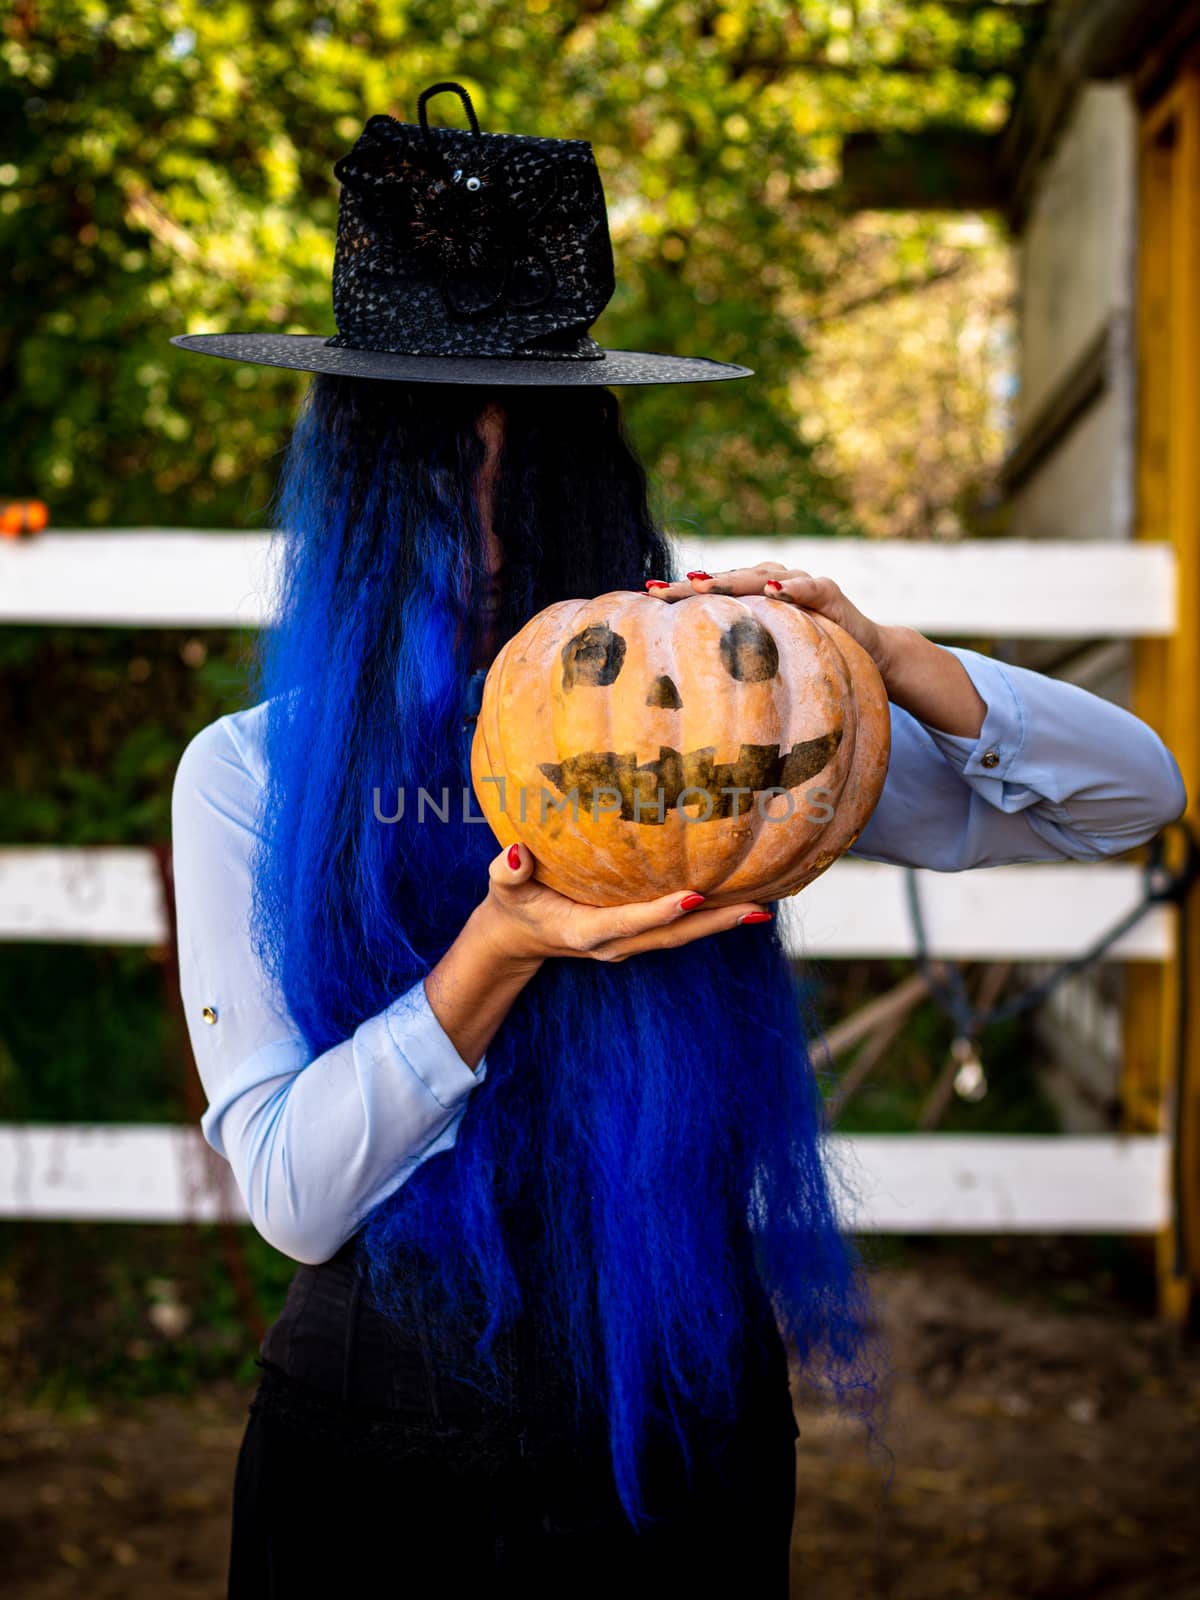 A girl with her hair covered face in a witch costume is holding a pumpkin with a painted face and a witch's cap